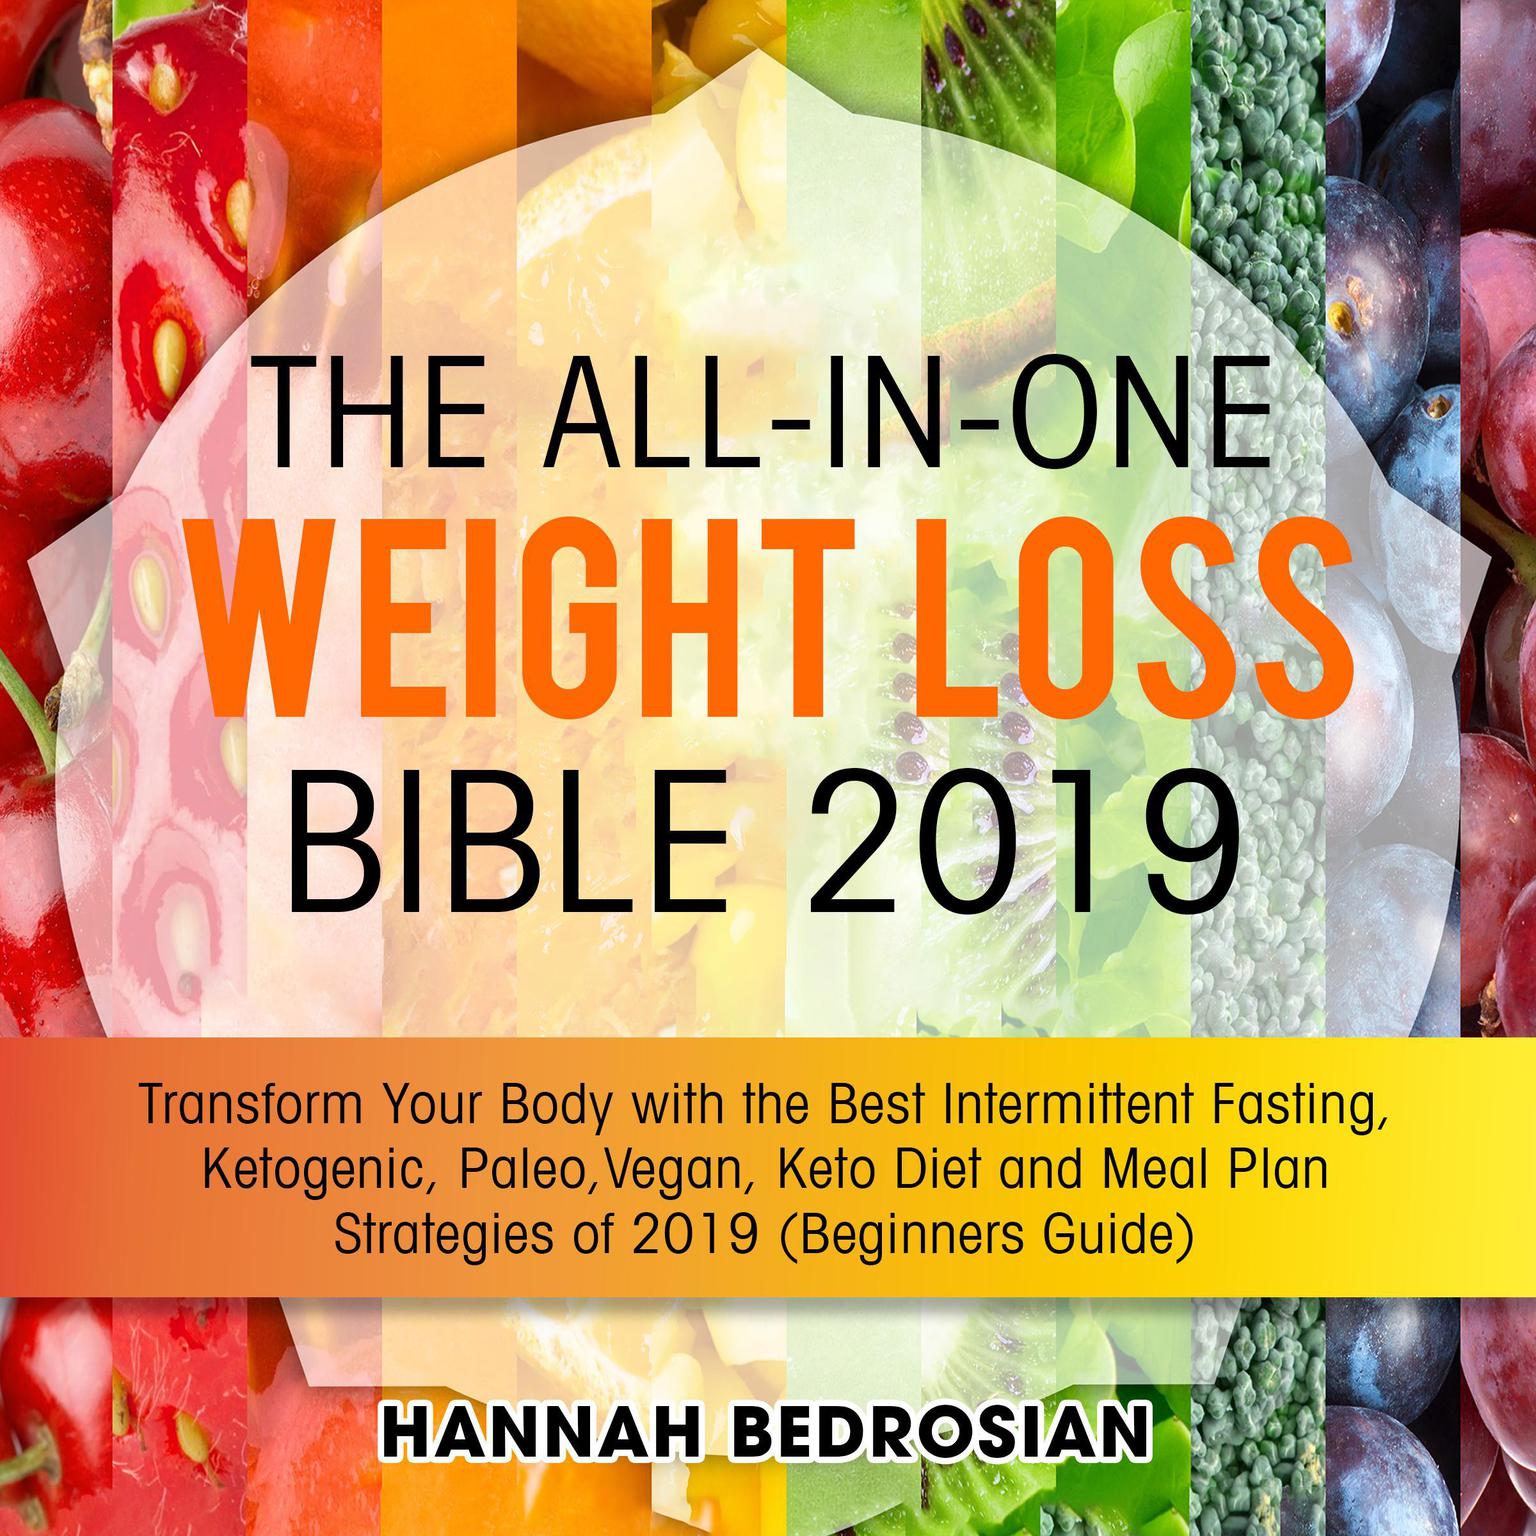 The All-in-One Weight Loss Bible 2019: Transform Your Body with the Best Intermittent Fasting, Ketogenic, Paleo, Vegan, Keto Diet and Meal Plan Strategies of 2019 (Beginners Guide): Transform Your Body with the Best Intermittent Fasting, Ketogenic, Paleo, Vegan, Keto Diet and Meal Plan Strategies of 2019 (Beginners Guide) Audiobook, by Hannah Bedrosian